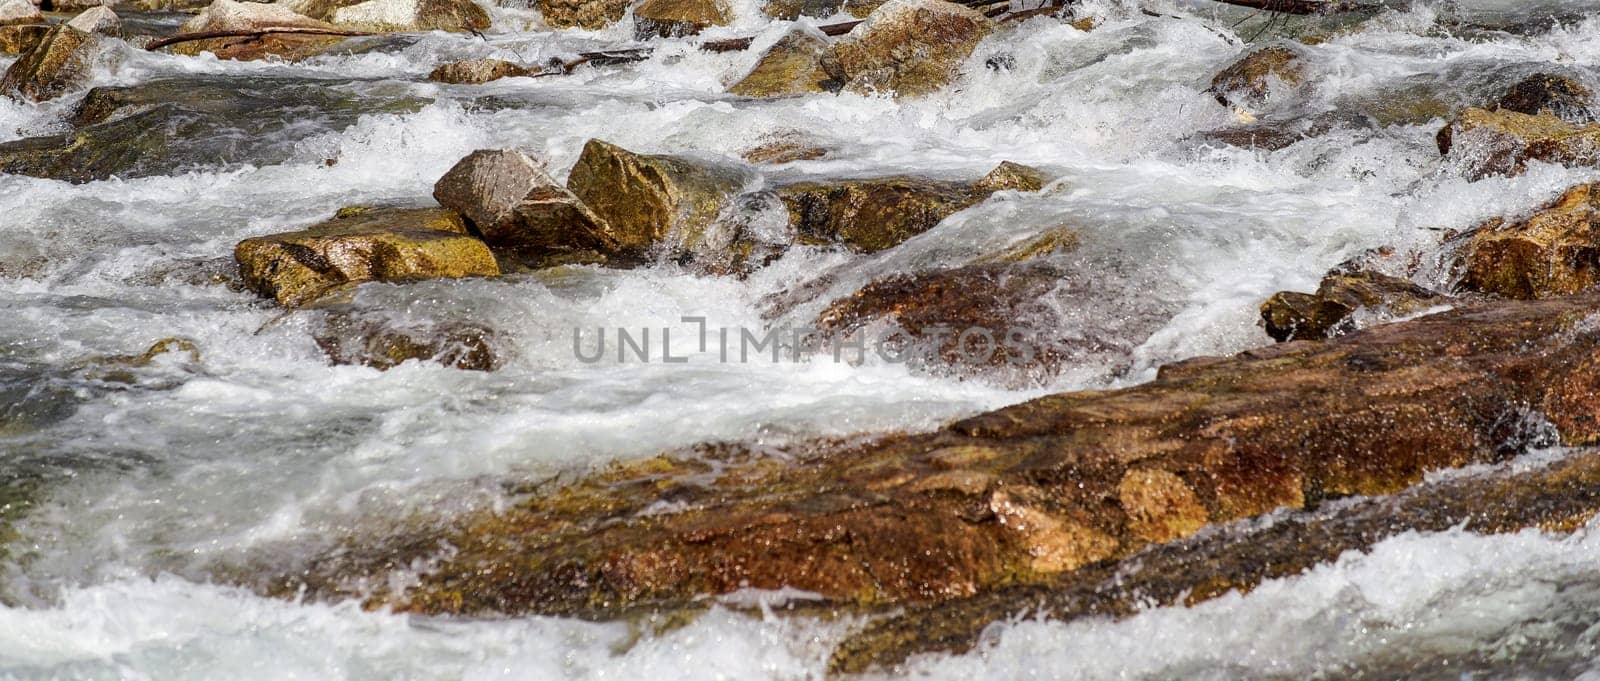 Sun shines on rapid spring river flowing over brown rocks, wide banner by Ivanko